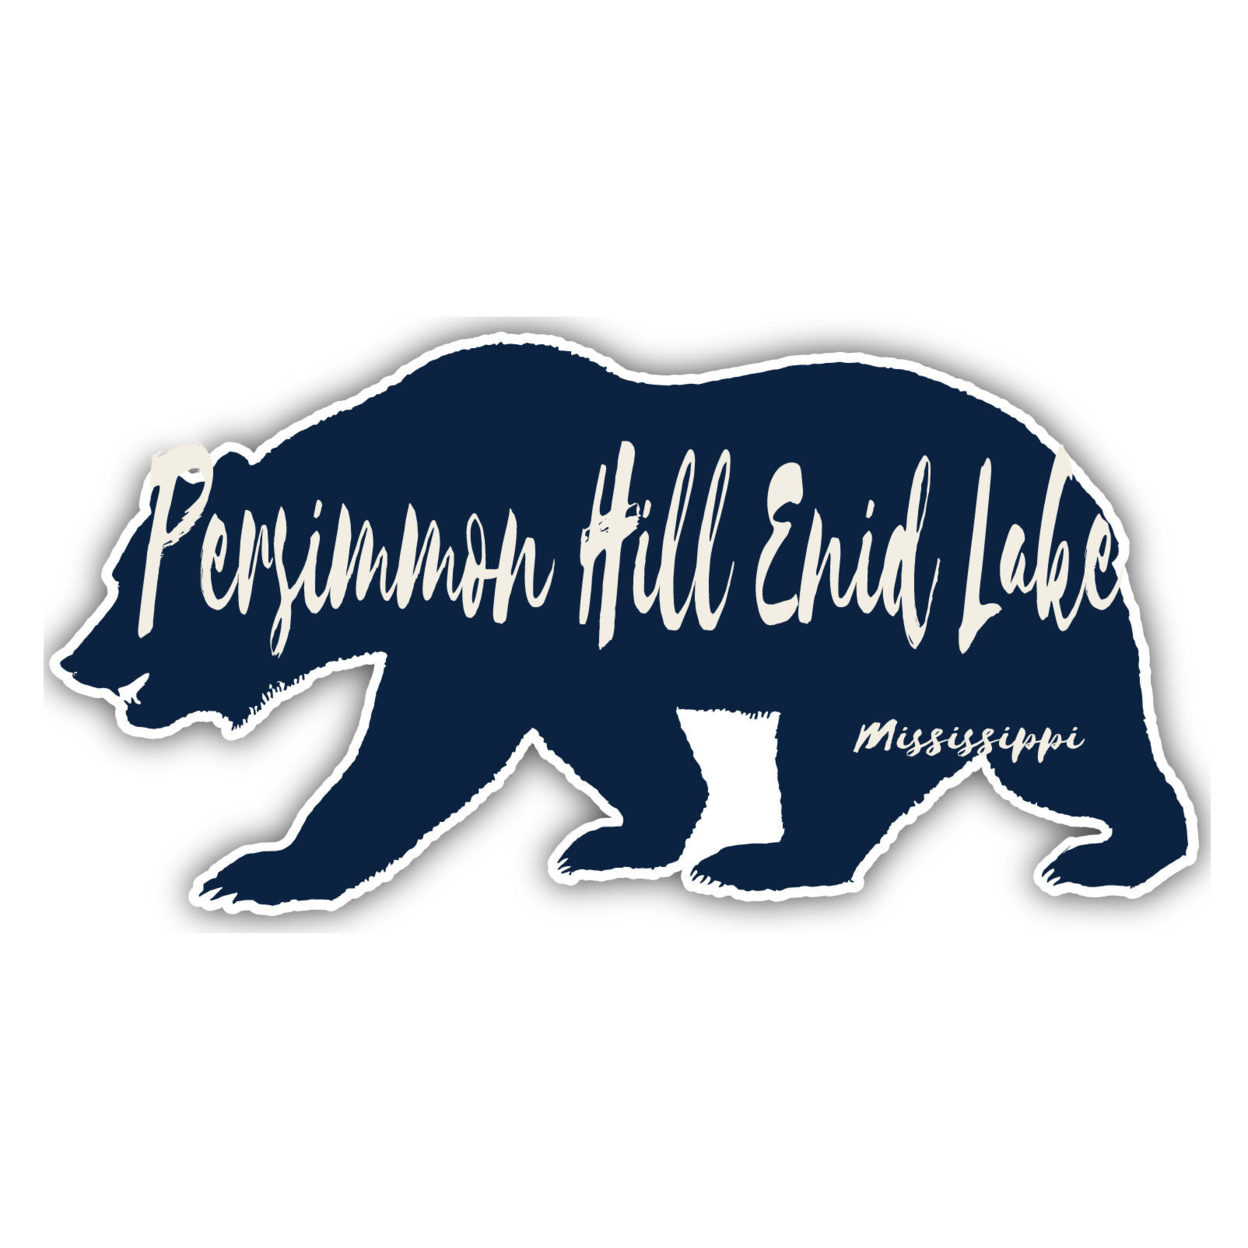 Persimmon Hill Enid Lake Mississippi Souvenir Decorative Stickers (Choose Theme And Size) - Single Unit, 4-Inch, Bear